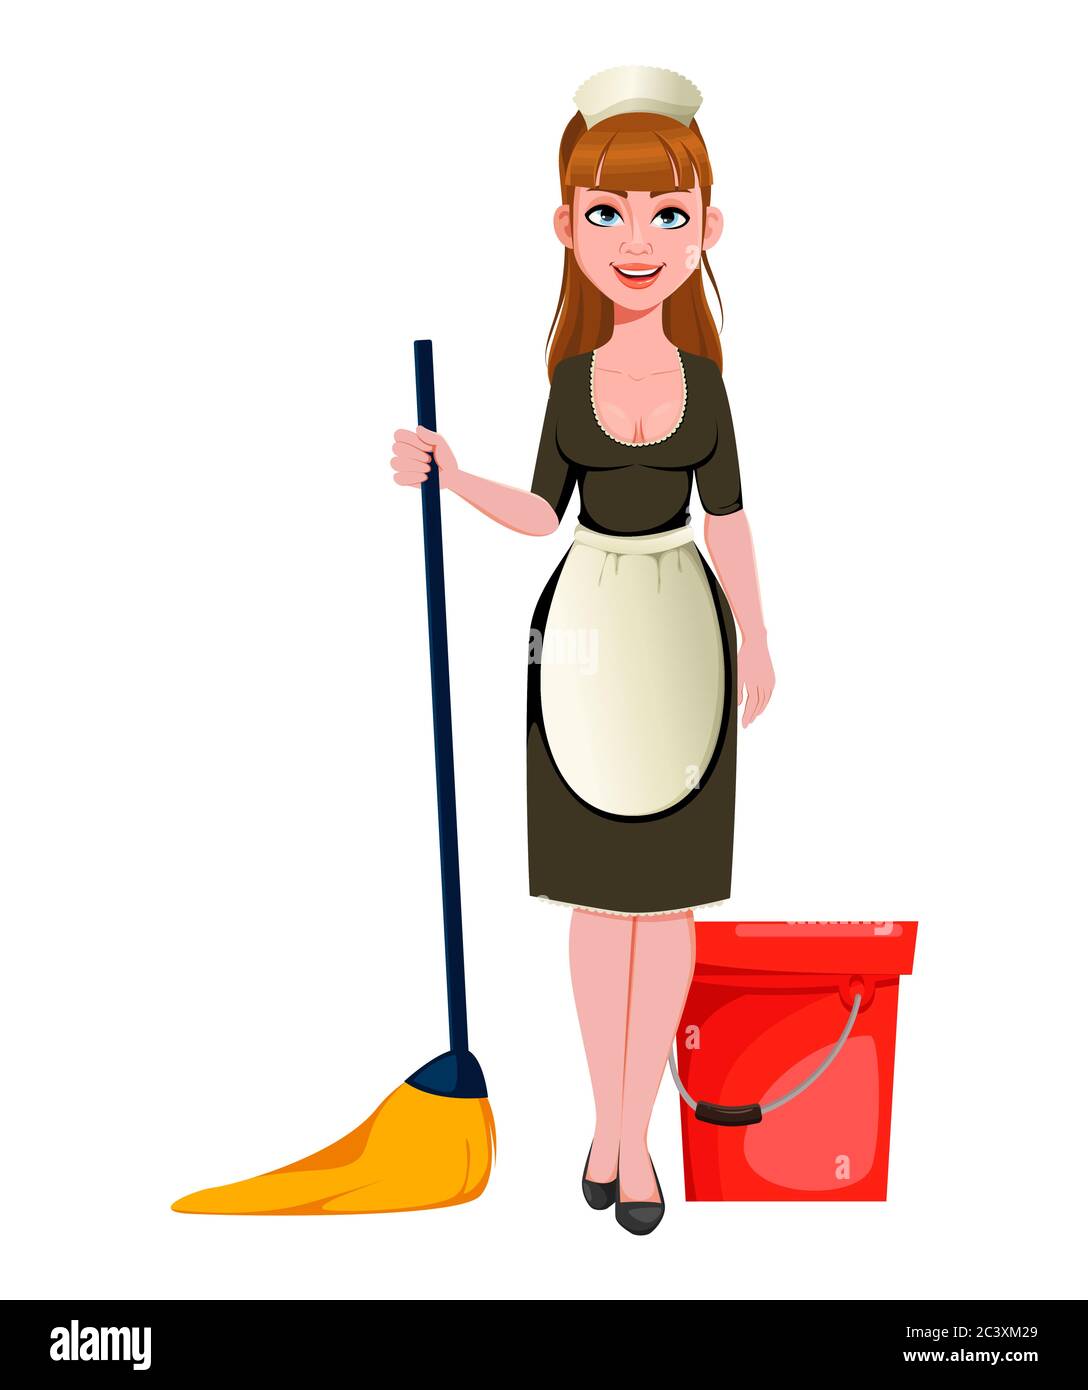 Maid Cleaning Lady Smiling Cleaning Woman Mops The Floor Cheerful Housemaid Cartoon Character